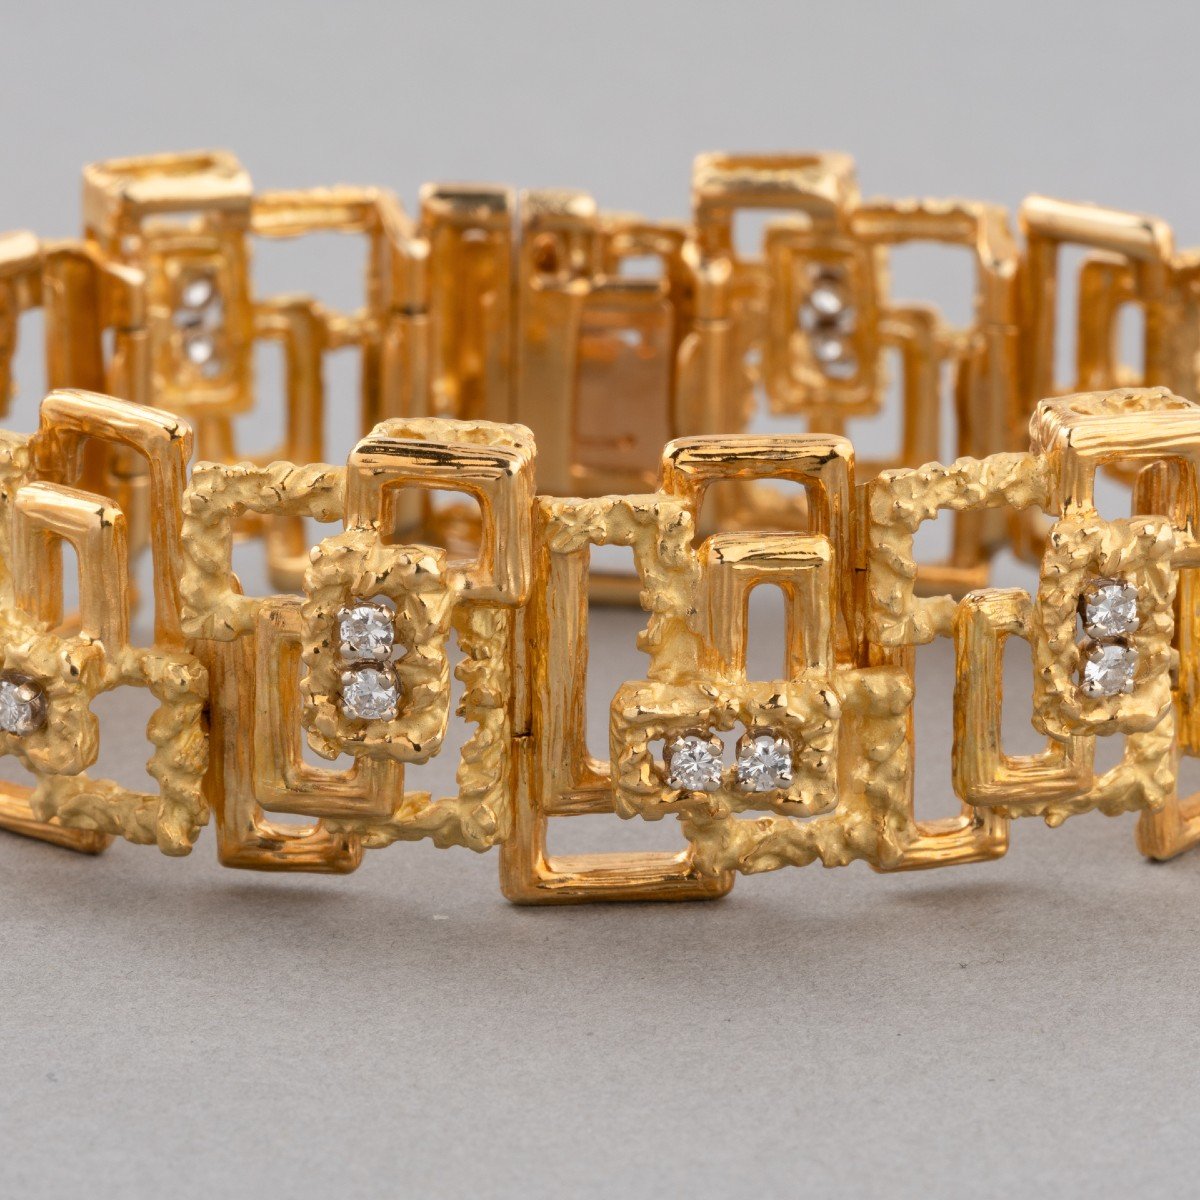 French Bracelet In Gold And Diamonds 70s.-photo-3